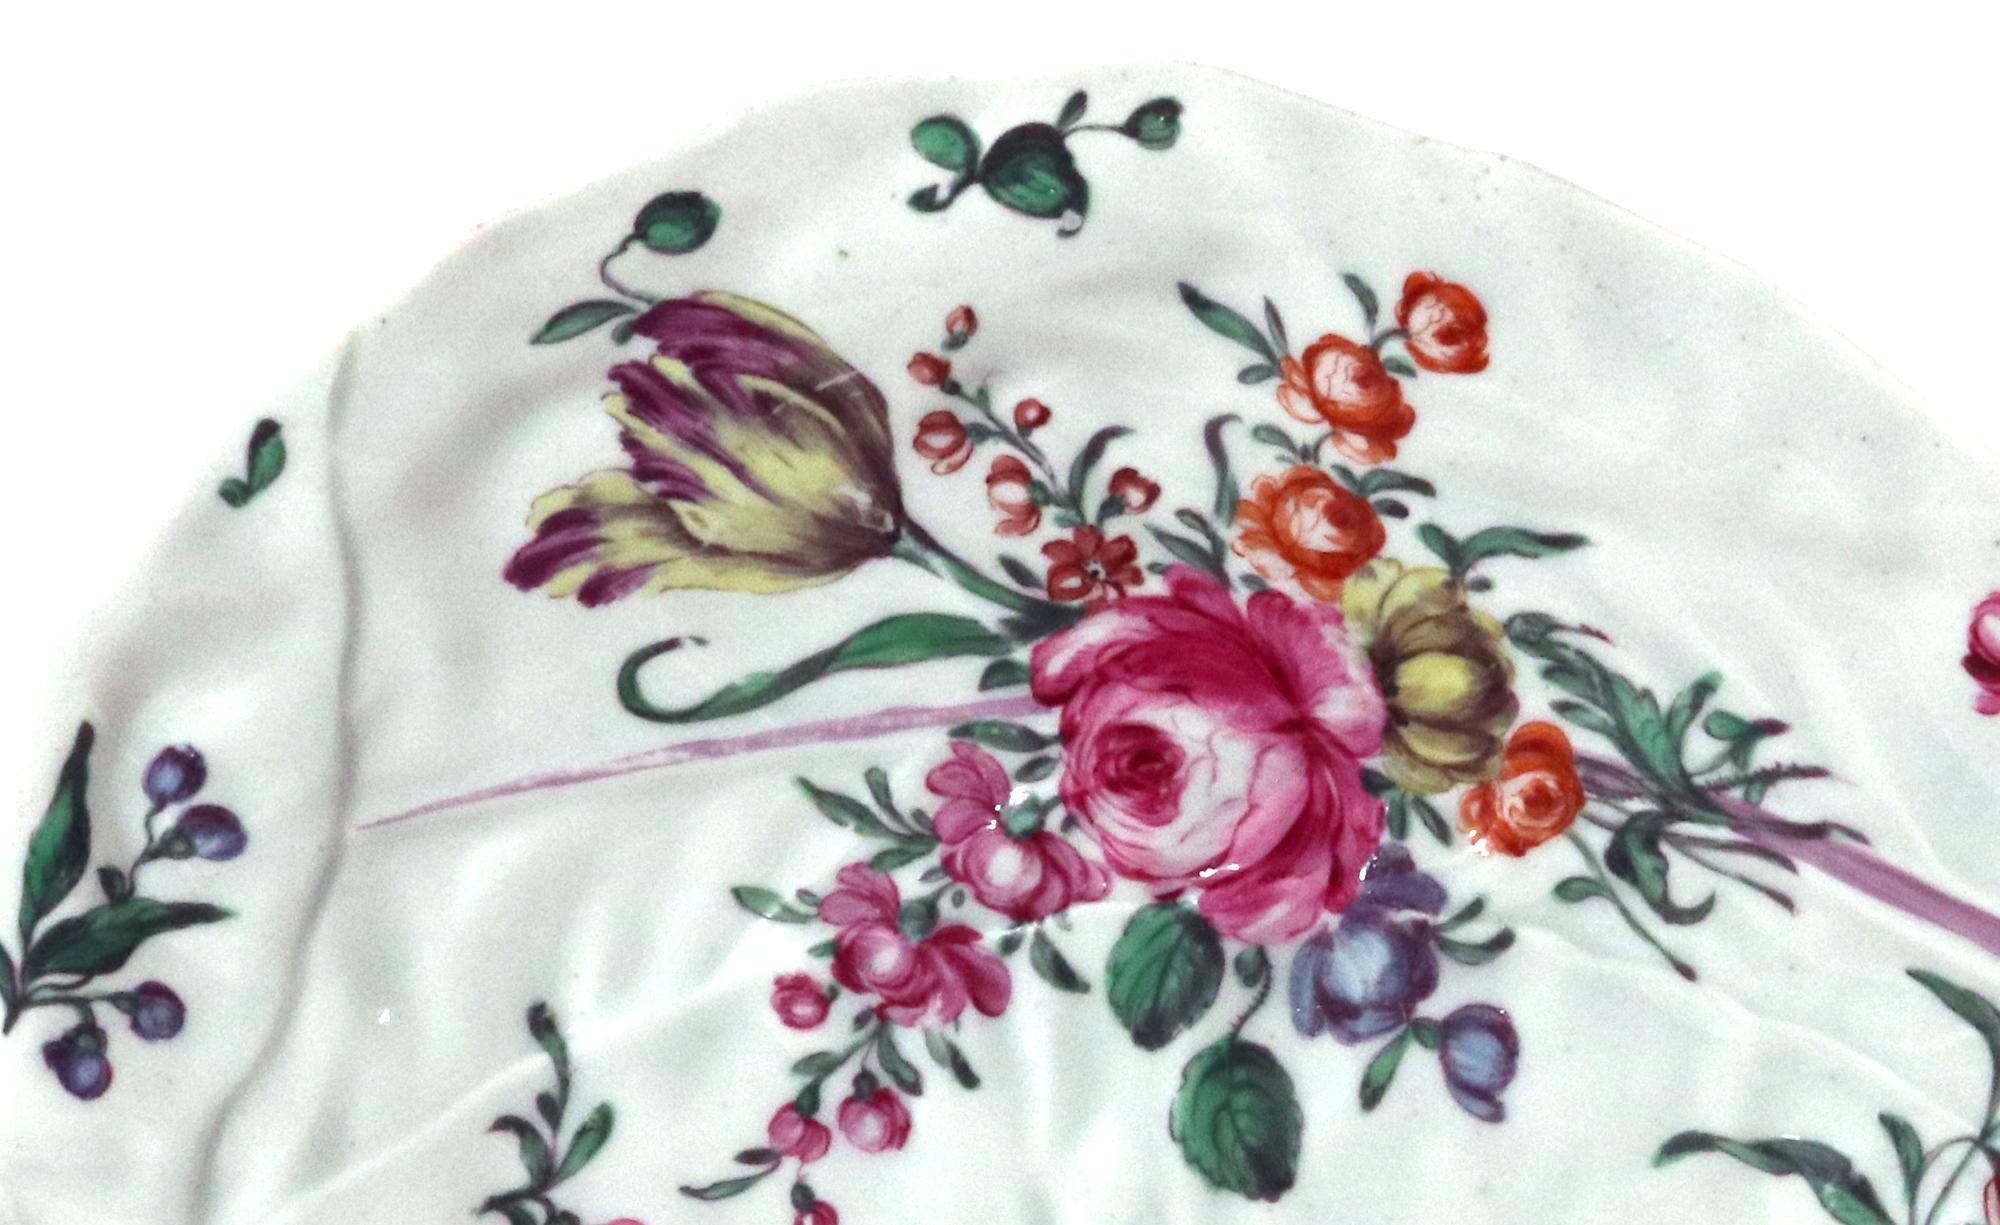 First Period Worcester botanical leaf dish,
Circa 1760

The First Period Worcester botanical leaf dish with two large molded leaves with purple veins and painted with a botanical bouquet and scattered flowers. 

Dimensions: 10 inches long x 7